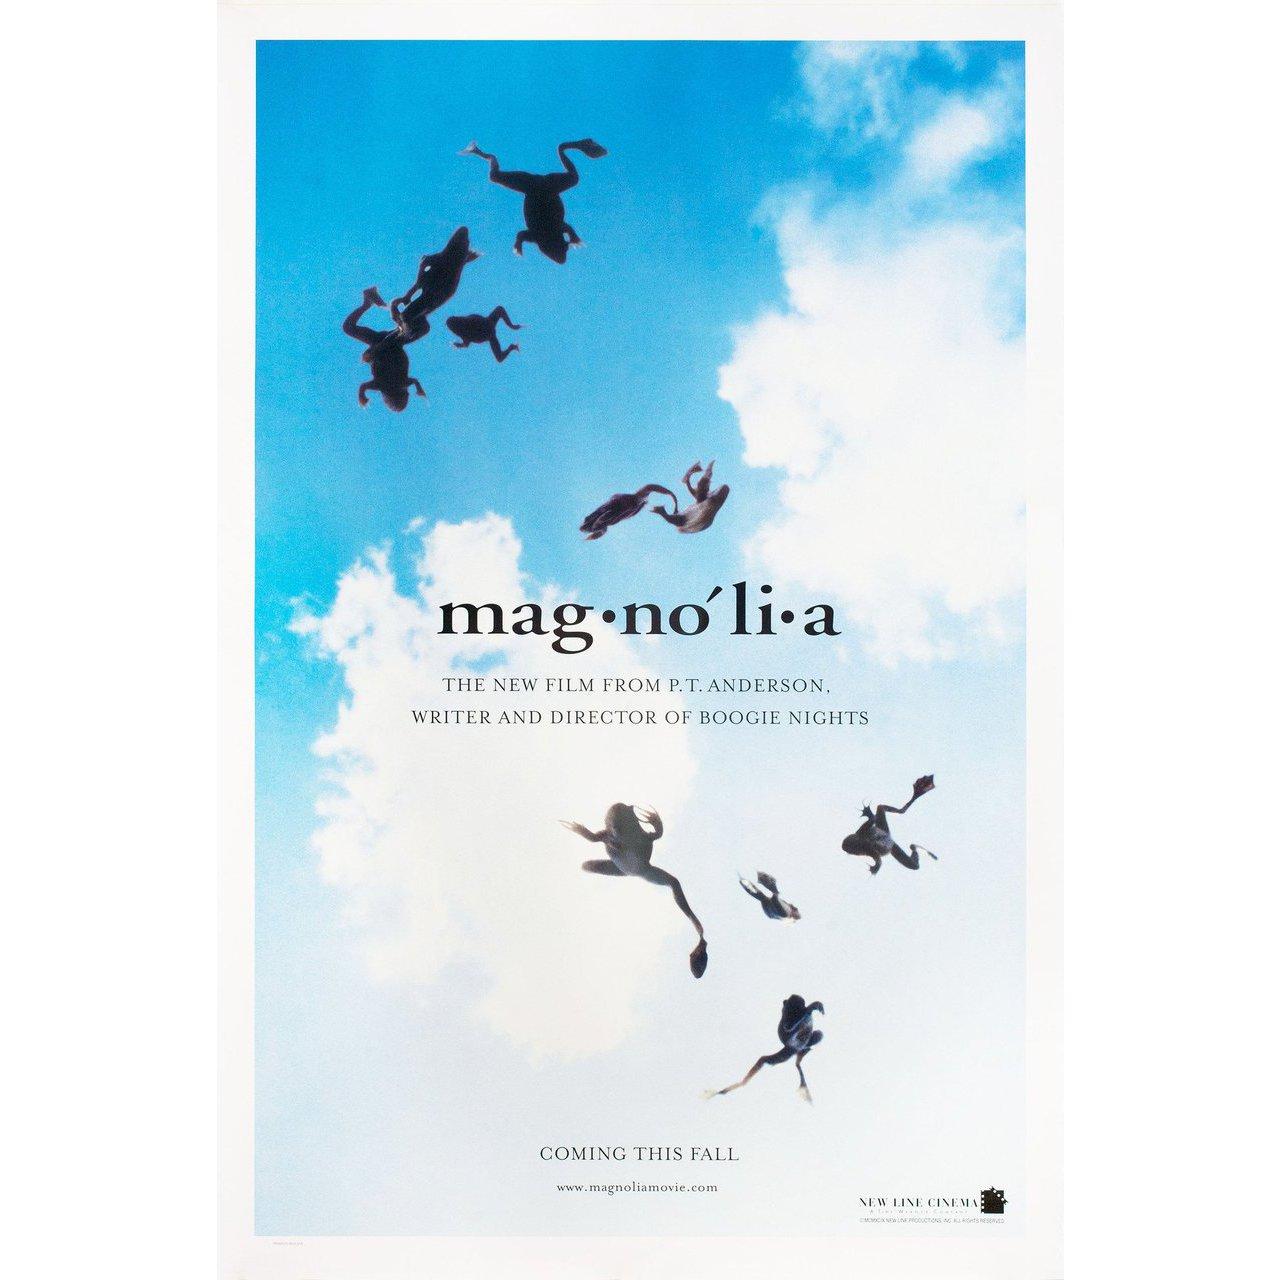 Original 1999 U.S. one sheet poster for the film Magnolia directed by Paul Thomas Anderson with Julianne Moore / William H. Macy / John C. Reilly / Tom Cruise. Very good-fine condition, rolled. Please note: the size is stated in inches and the